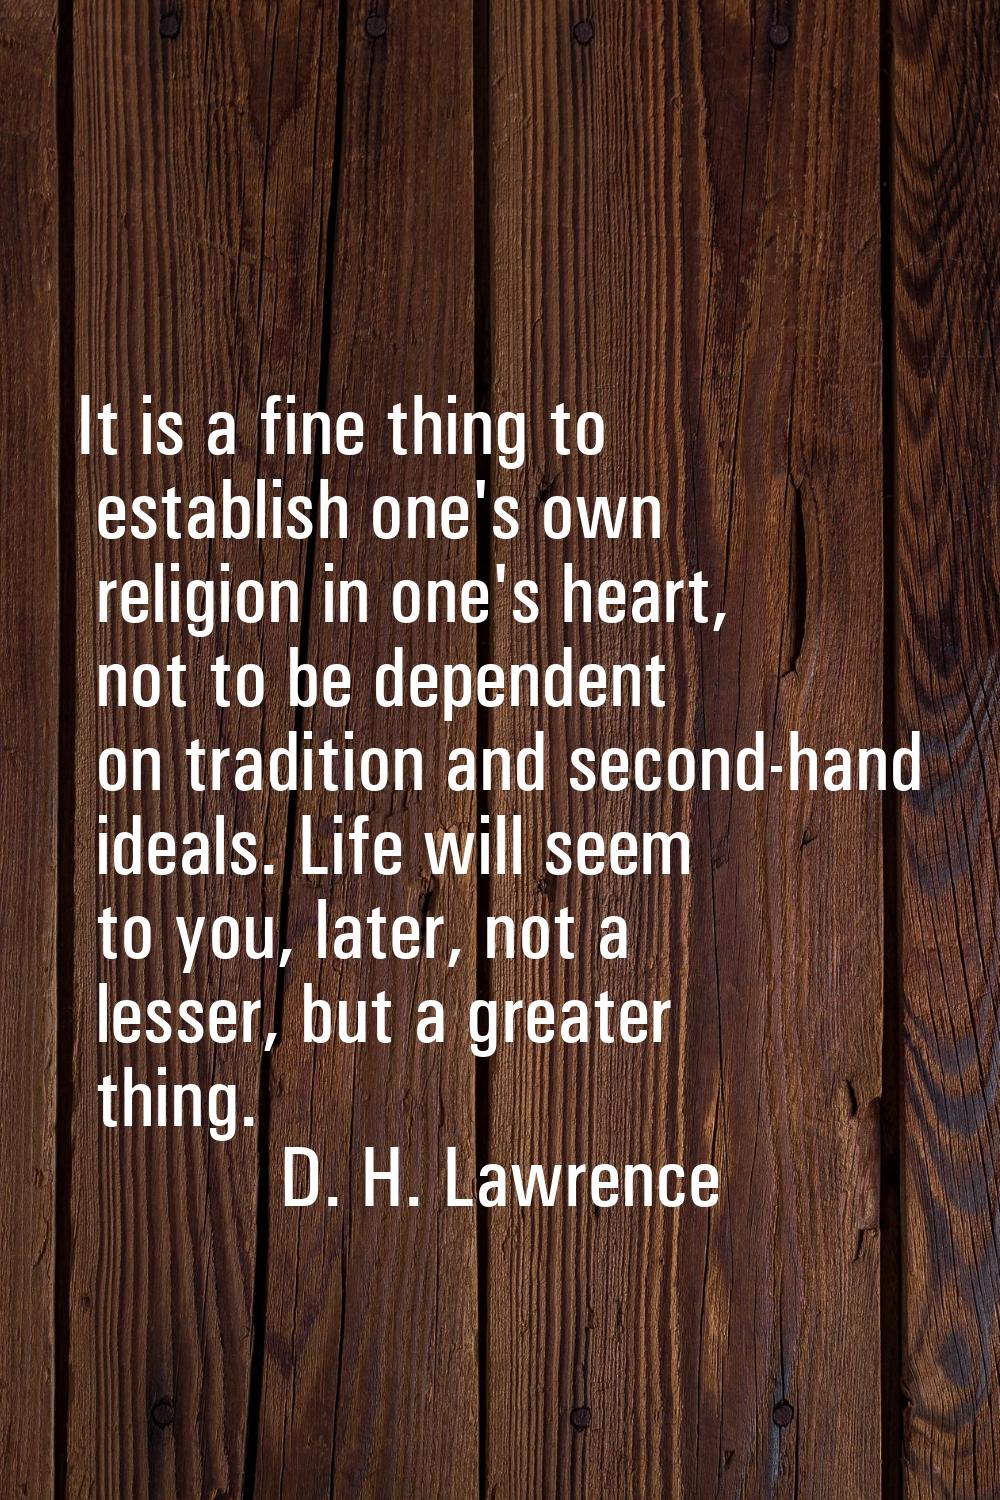 It is a fine thing to establish one's own religion in one's heart, not to be dependent on tradition